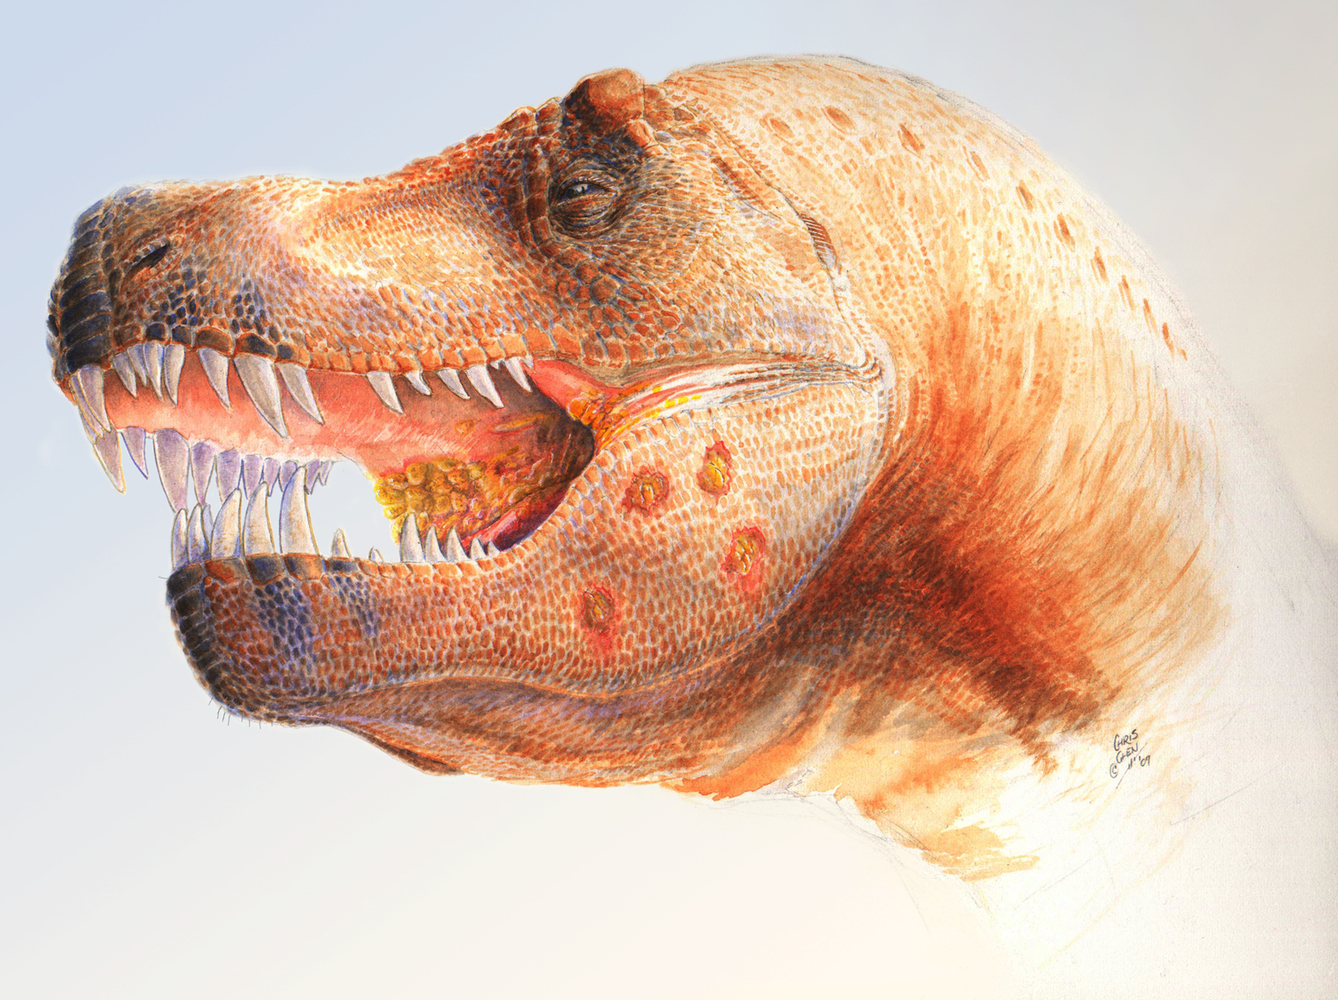 Figure 2 - Hypothesized reconstruction of the Trichomonas-like infection of a Tyrannosaurus rex. Parasites have plagued vertebrates for a very, very long time. They have co-evolved with us and our evolutionary ancestors over many millions of years.